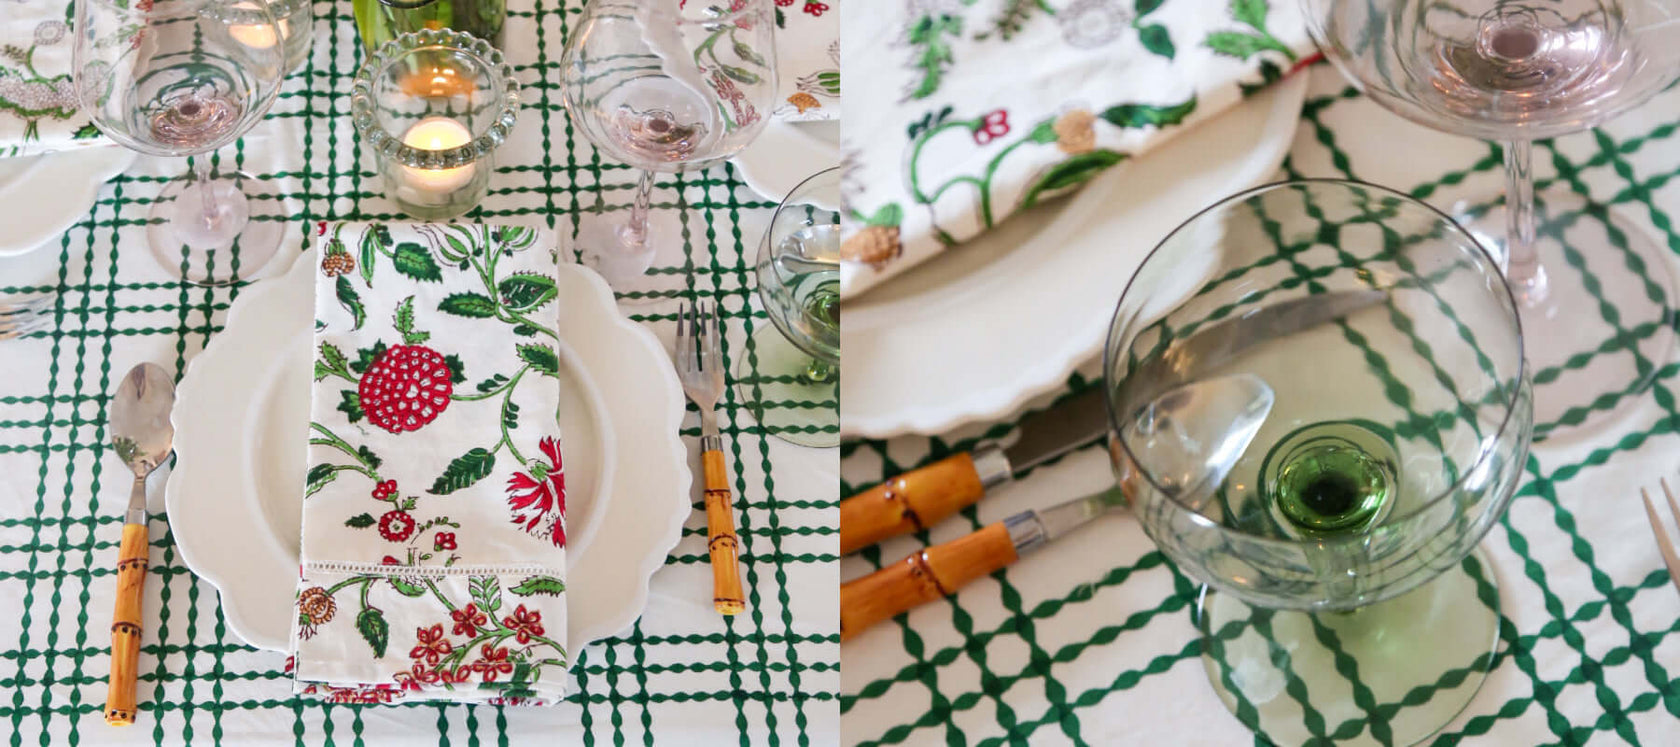 Green and white block printed tablecloth with cotton napkins